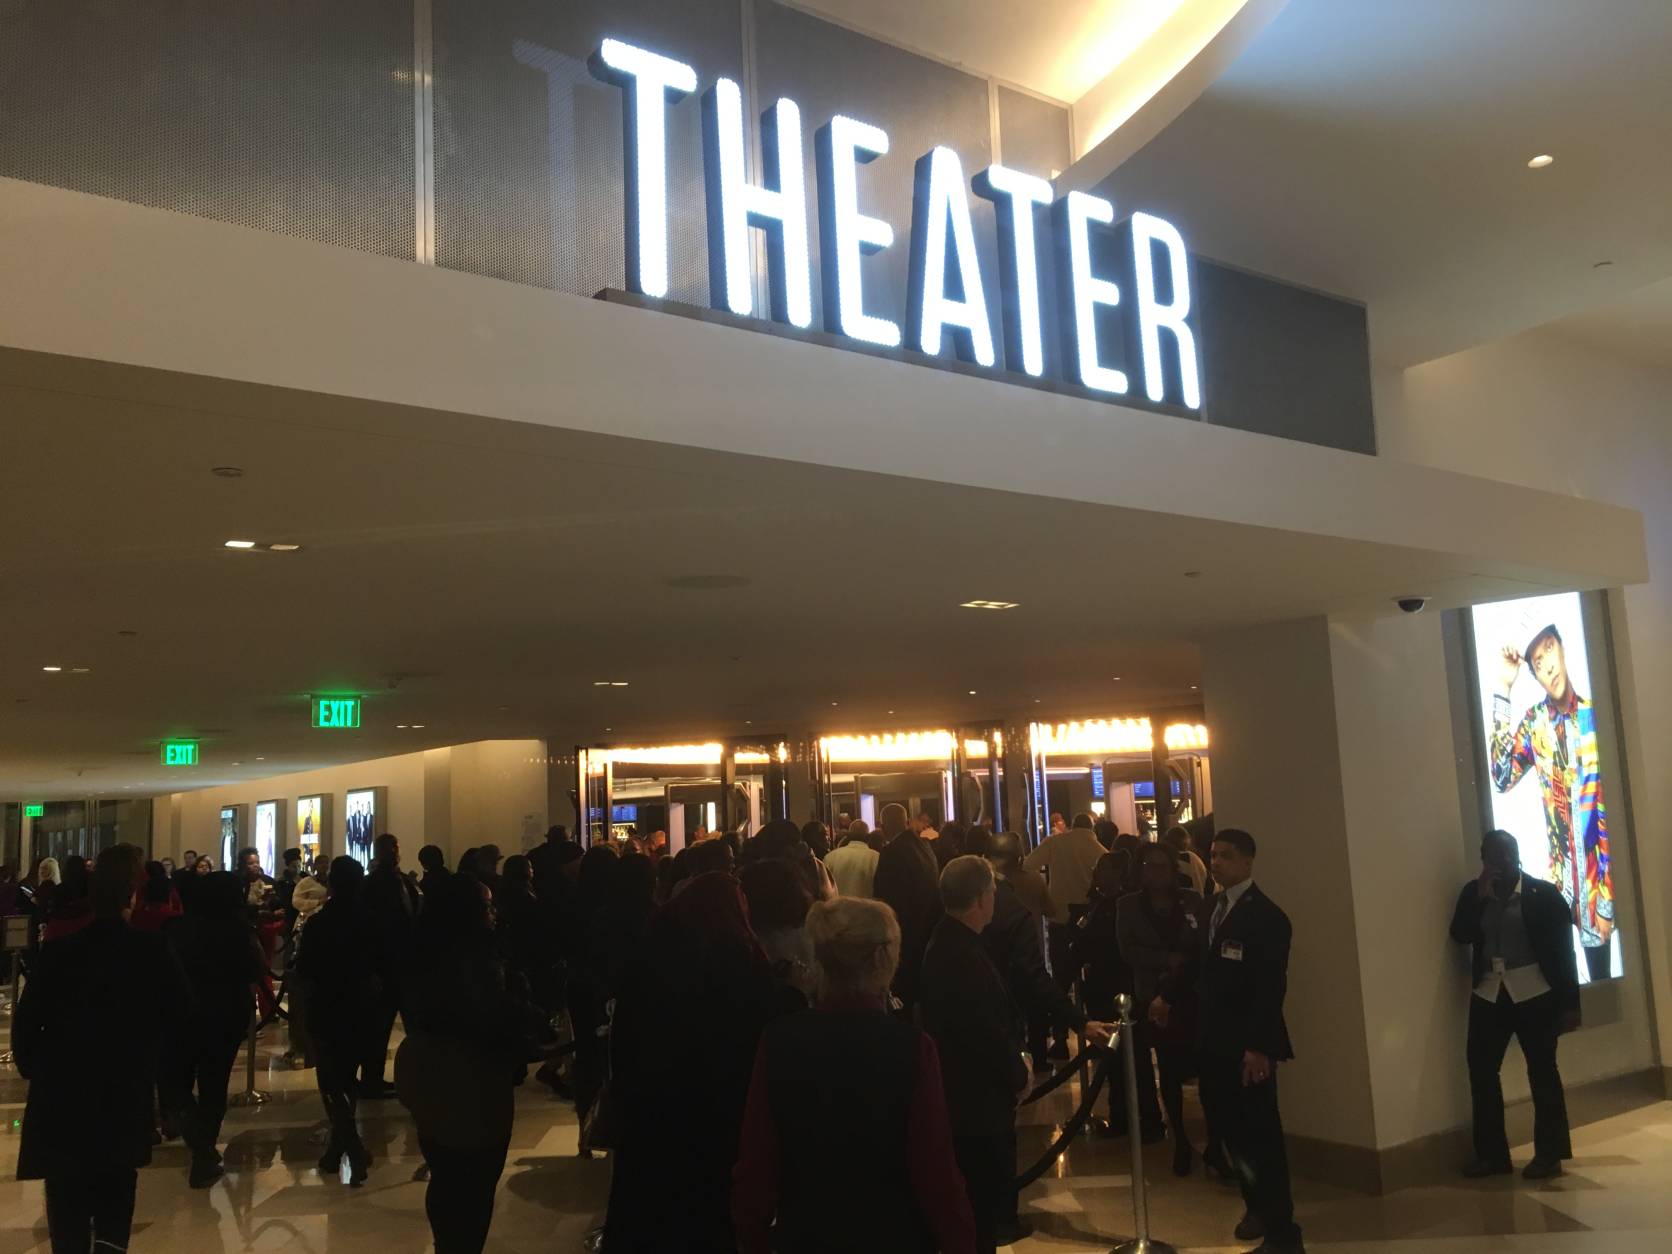 The entrance to the Theater at the MGM National Harbor. (WTOP/Mike Murillo)